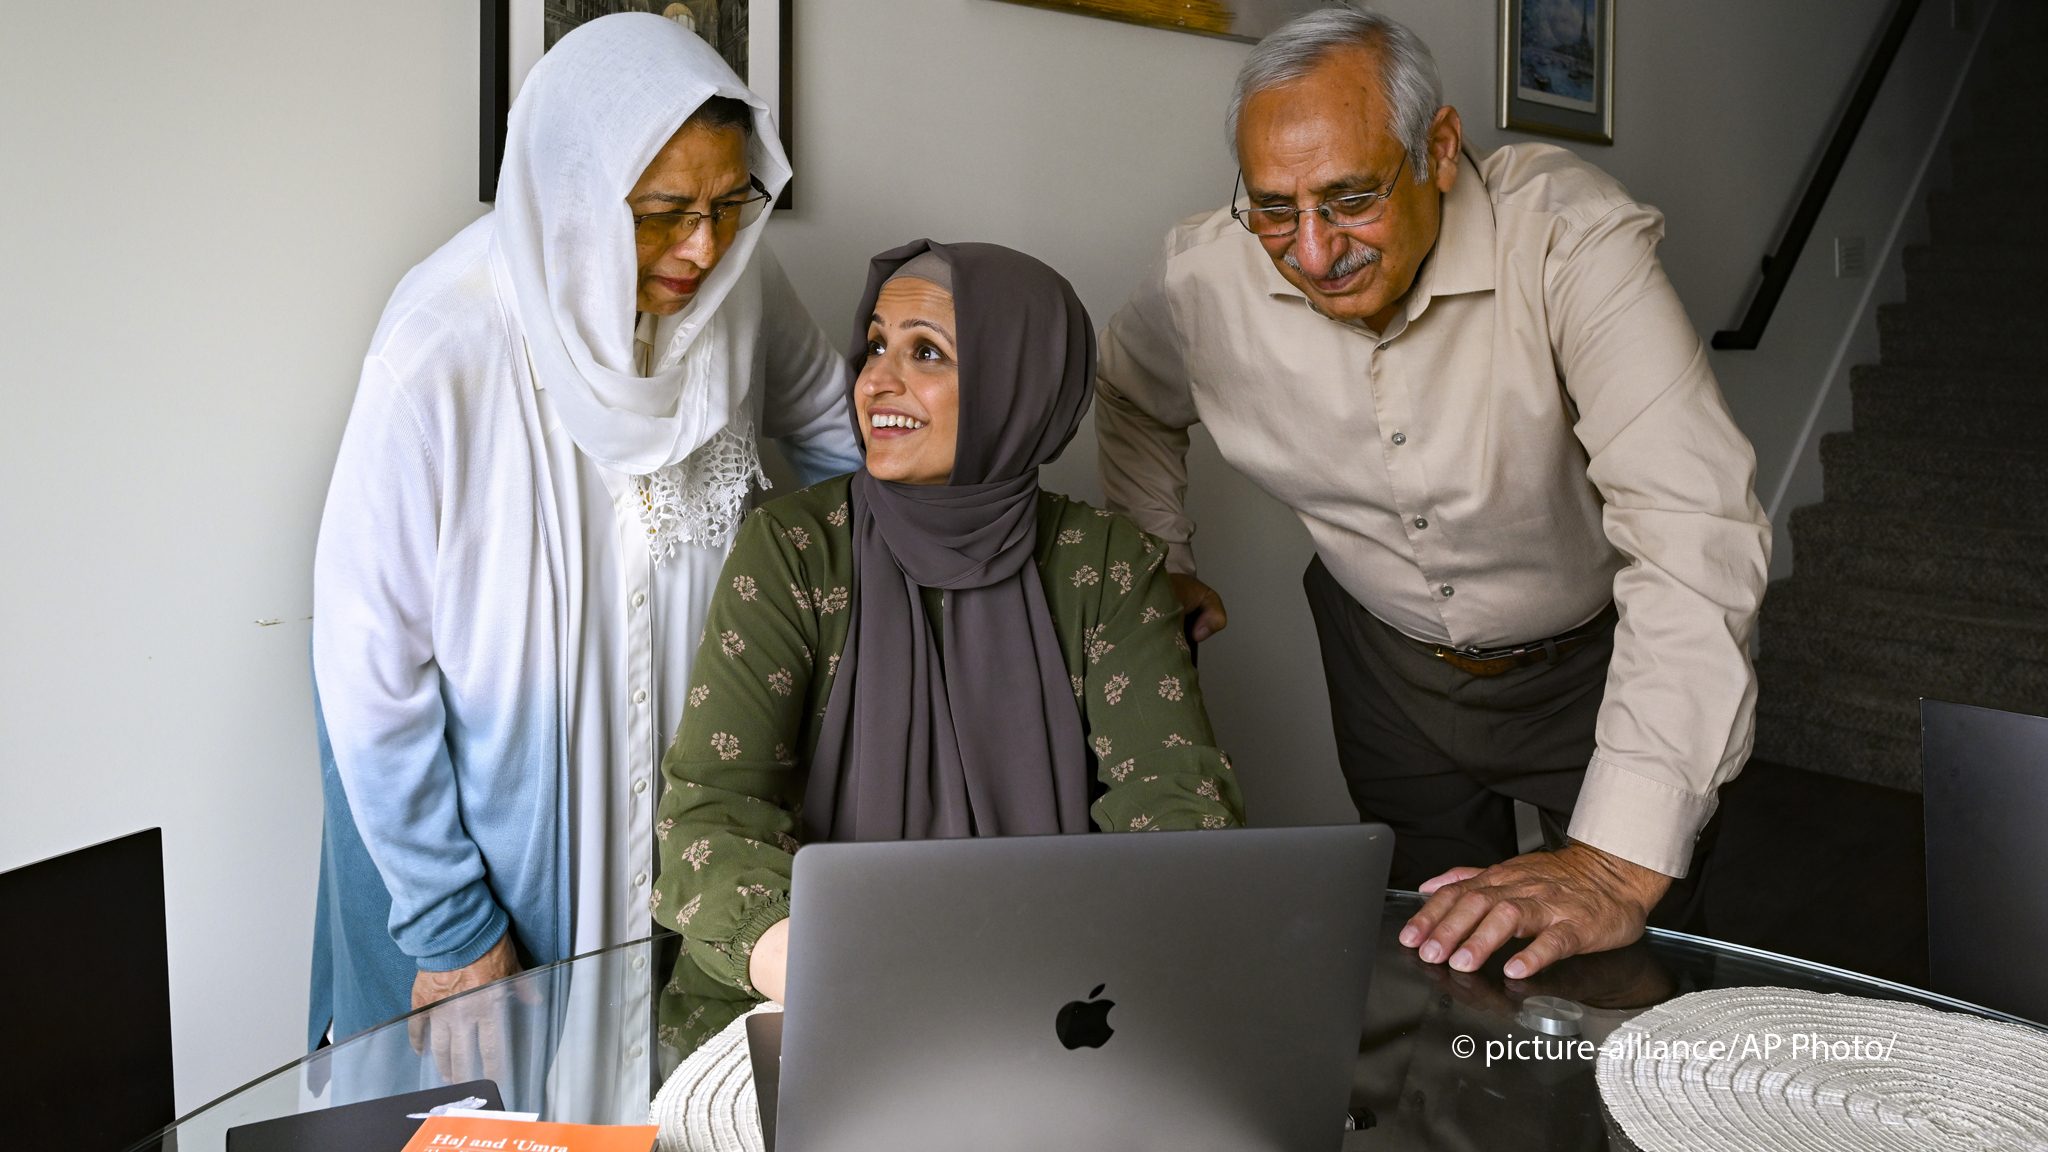 Muslim family members Saadiha, seated, Saeeda, and Abdul Khaliq, right, gather around a computer which they use to research for their hajj trip, pictured Wednesday, June. 7, 2023, in Murfreesboro, Tenn. The Khaliq family are planning to travel together to Mecca in Saudi Arabia for hajj, pilgrimage which every adult Muslim who can afford it and is physically able must make at least once in his or her lifetime. The hajj is the fifth of the fundamental Muslim practices and institutions known as the Five Pillar